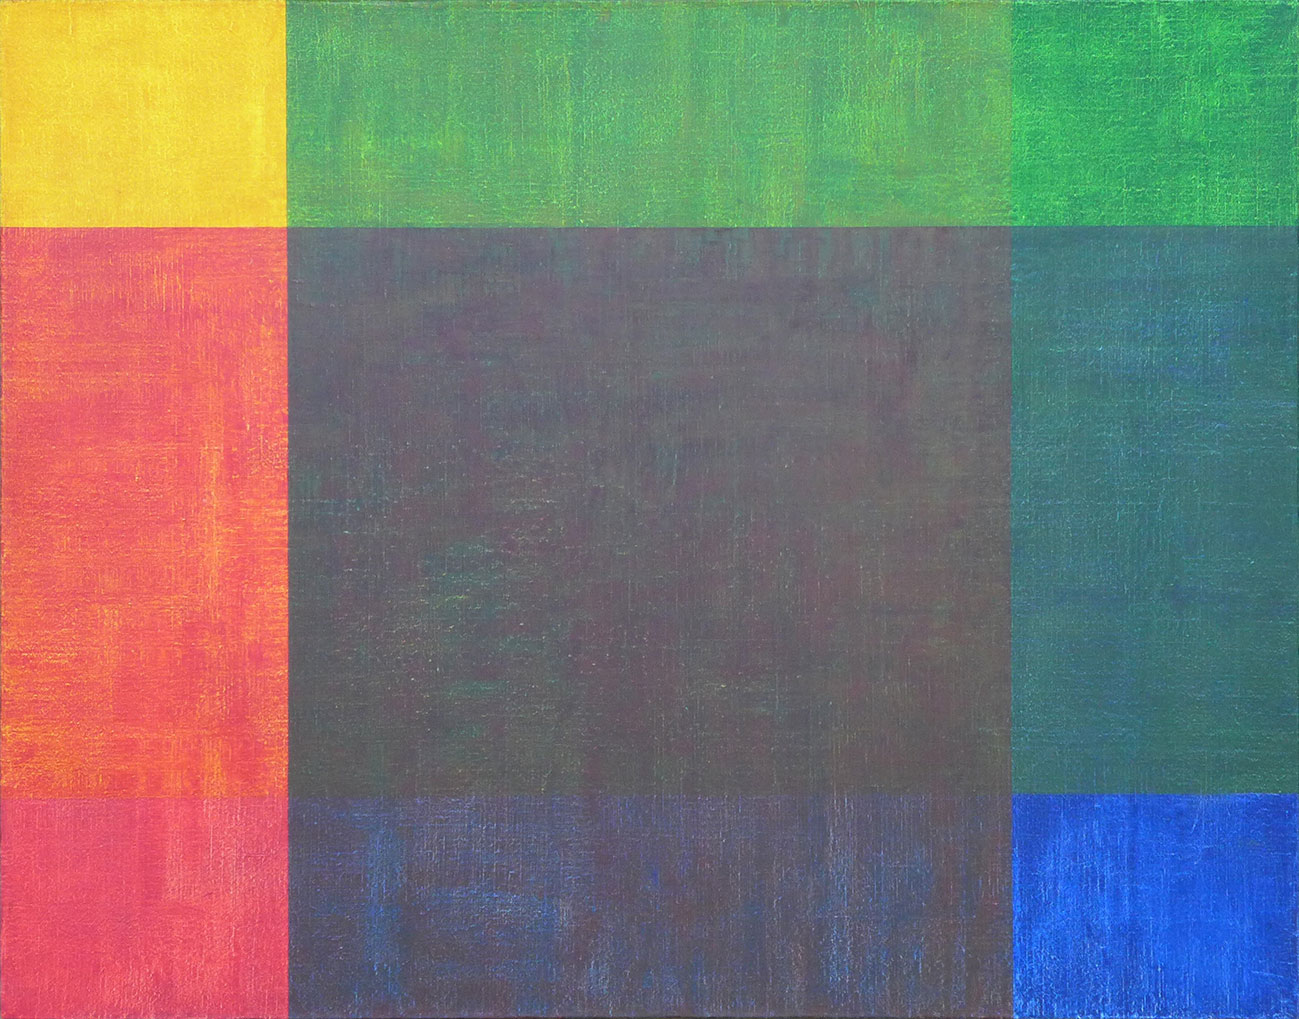 4 gold rectangles of the second kind of 4 colors, blue, green, yellow and red, are partly superimposed in a levogyral rotational movement with transparent colors for finer optical blend on a canvas of one square meter.